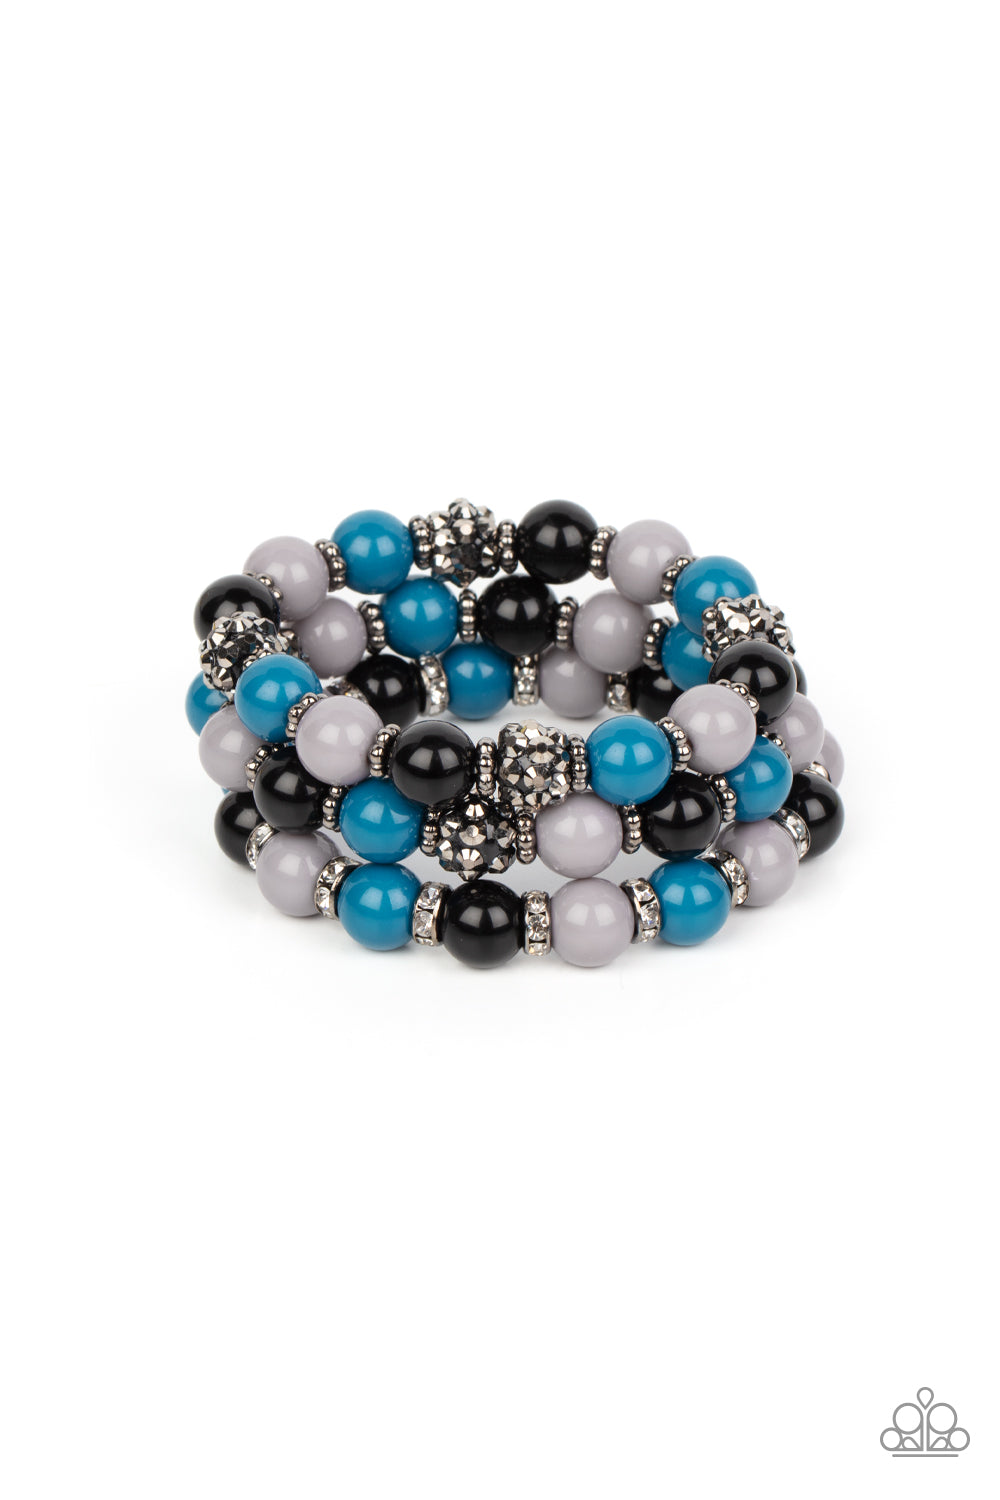  posh collection of polished multicolored beads, studded gunmetal rings, white rhinestone encrusted rings, and hematite dotted beads are threaded along stretchy bands around the wrist